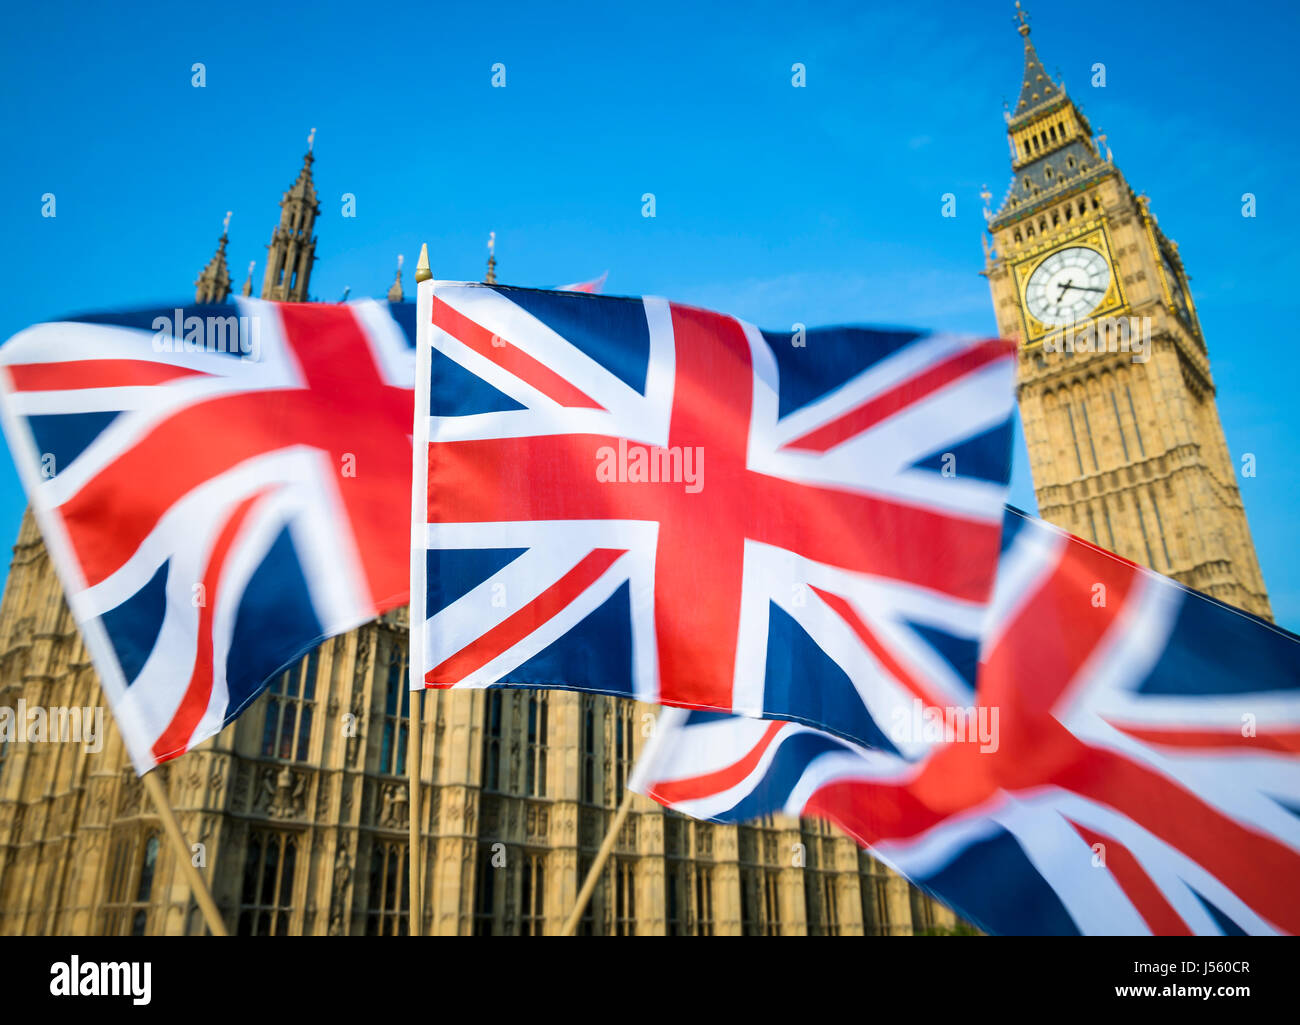 Great British Union Jack flag sflying in motion blur in front of Big Ben and the Houses of Parliament at Westminster Palace, London, UK Stock Photo